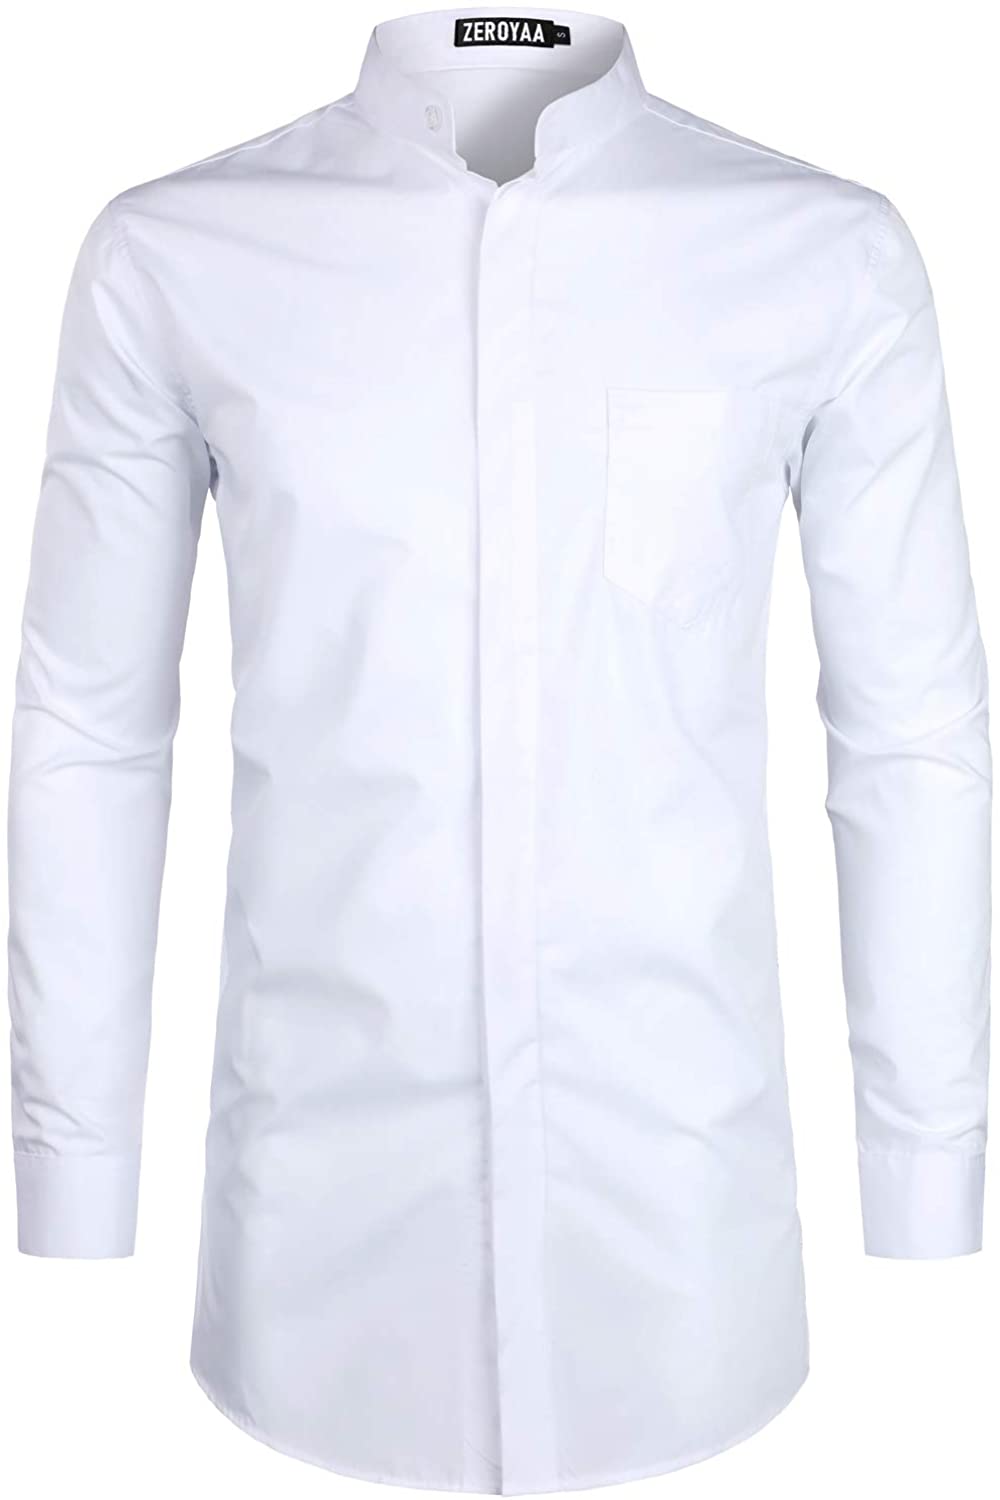 ZEROYAA Men's Hipster Slim Fit Long Sleeve Banded Collar Shirt with Pocket